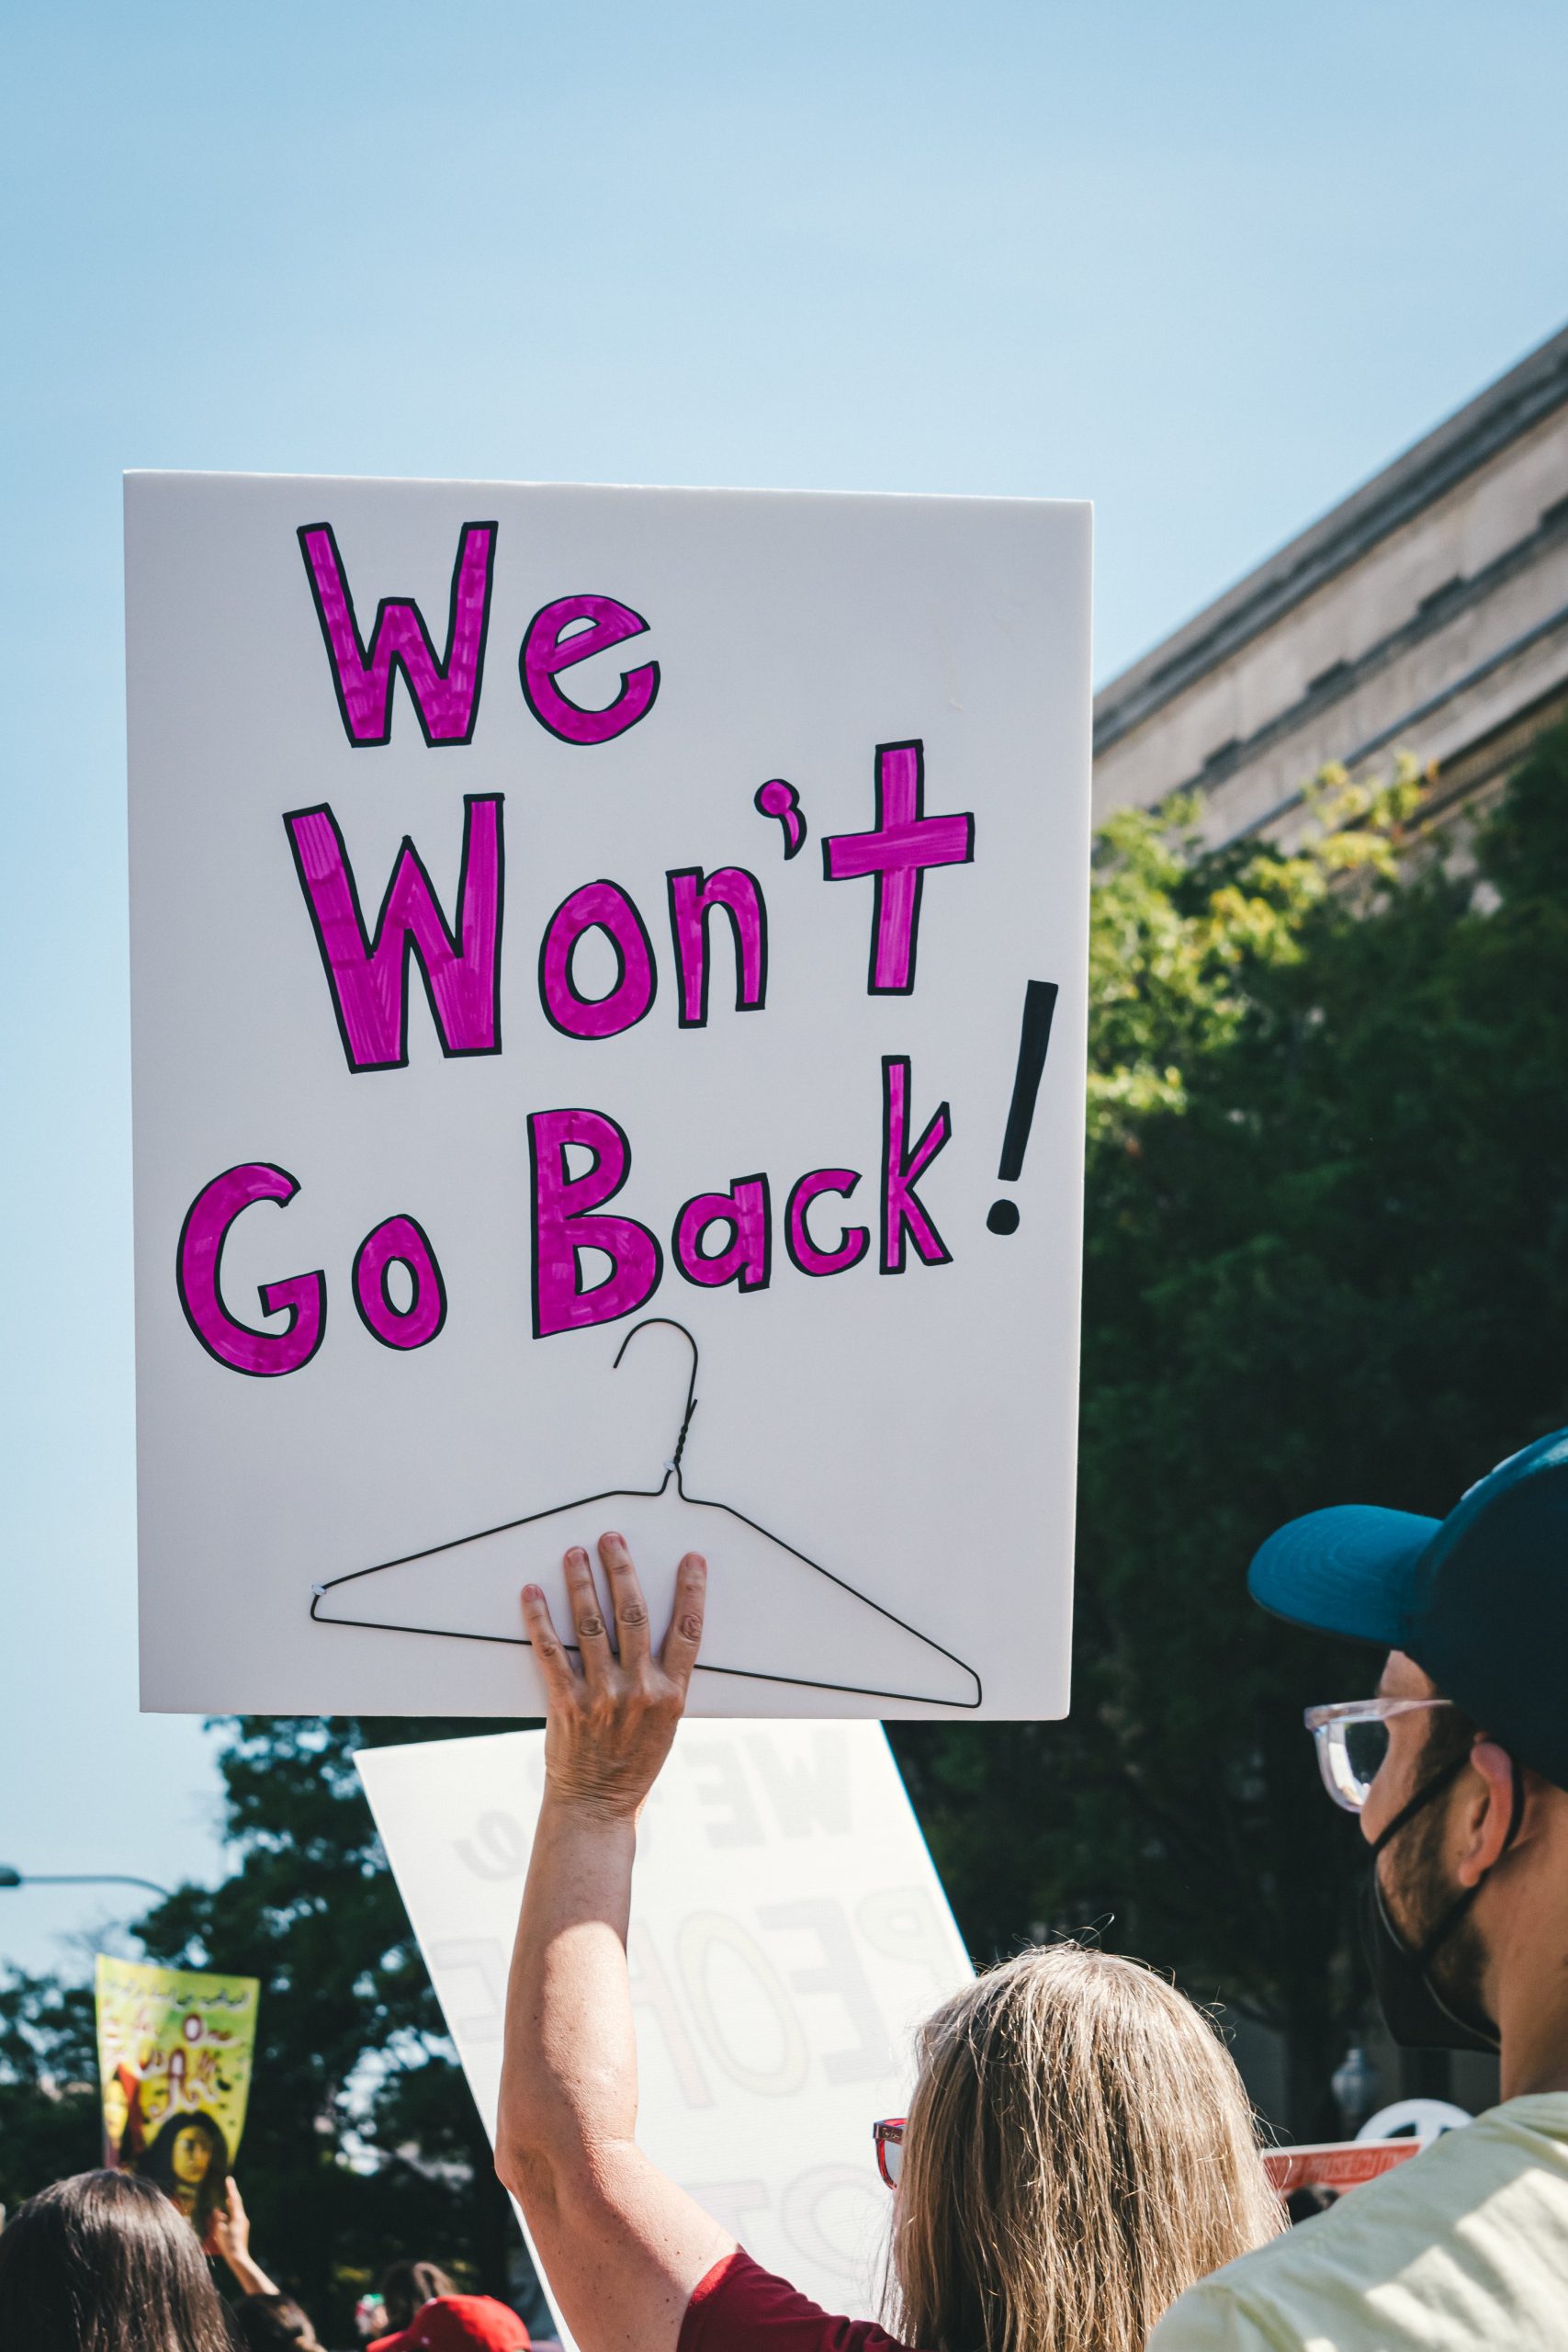 Protest sign that says "we won't go back" and has a picture of a coat hanger